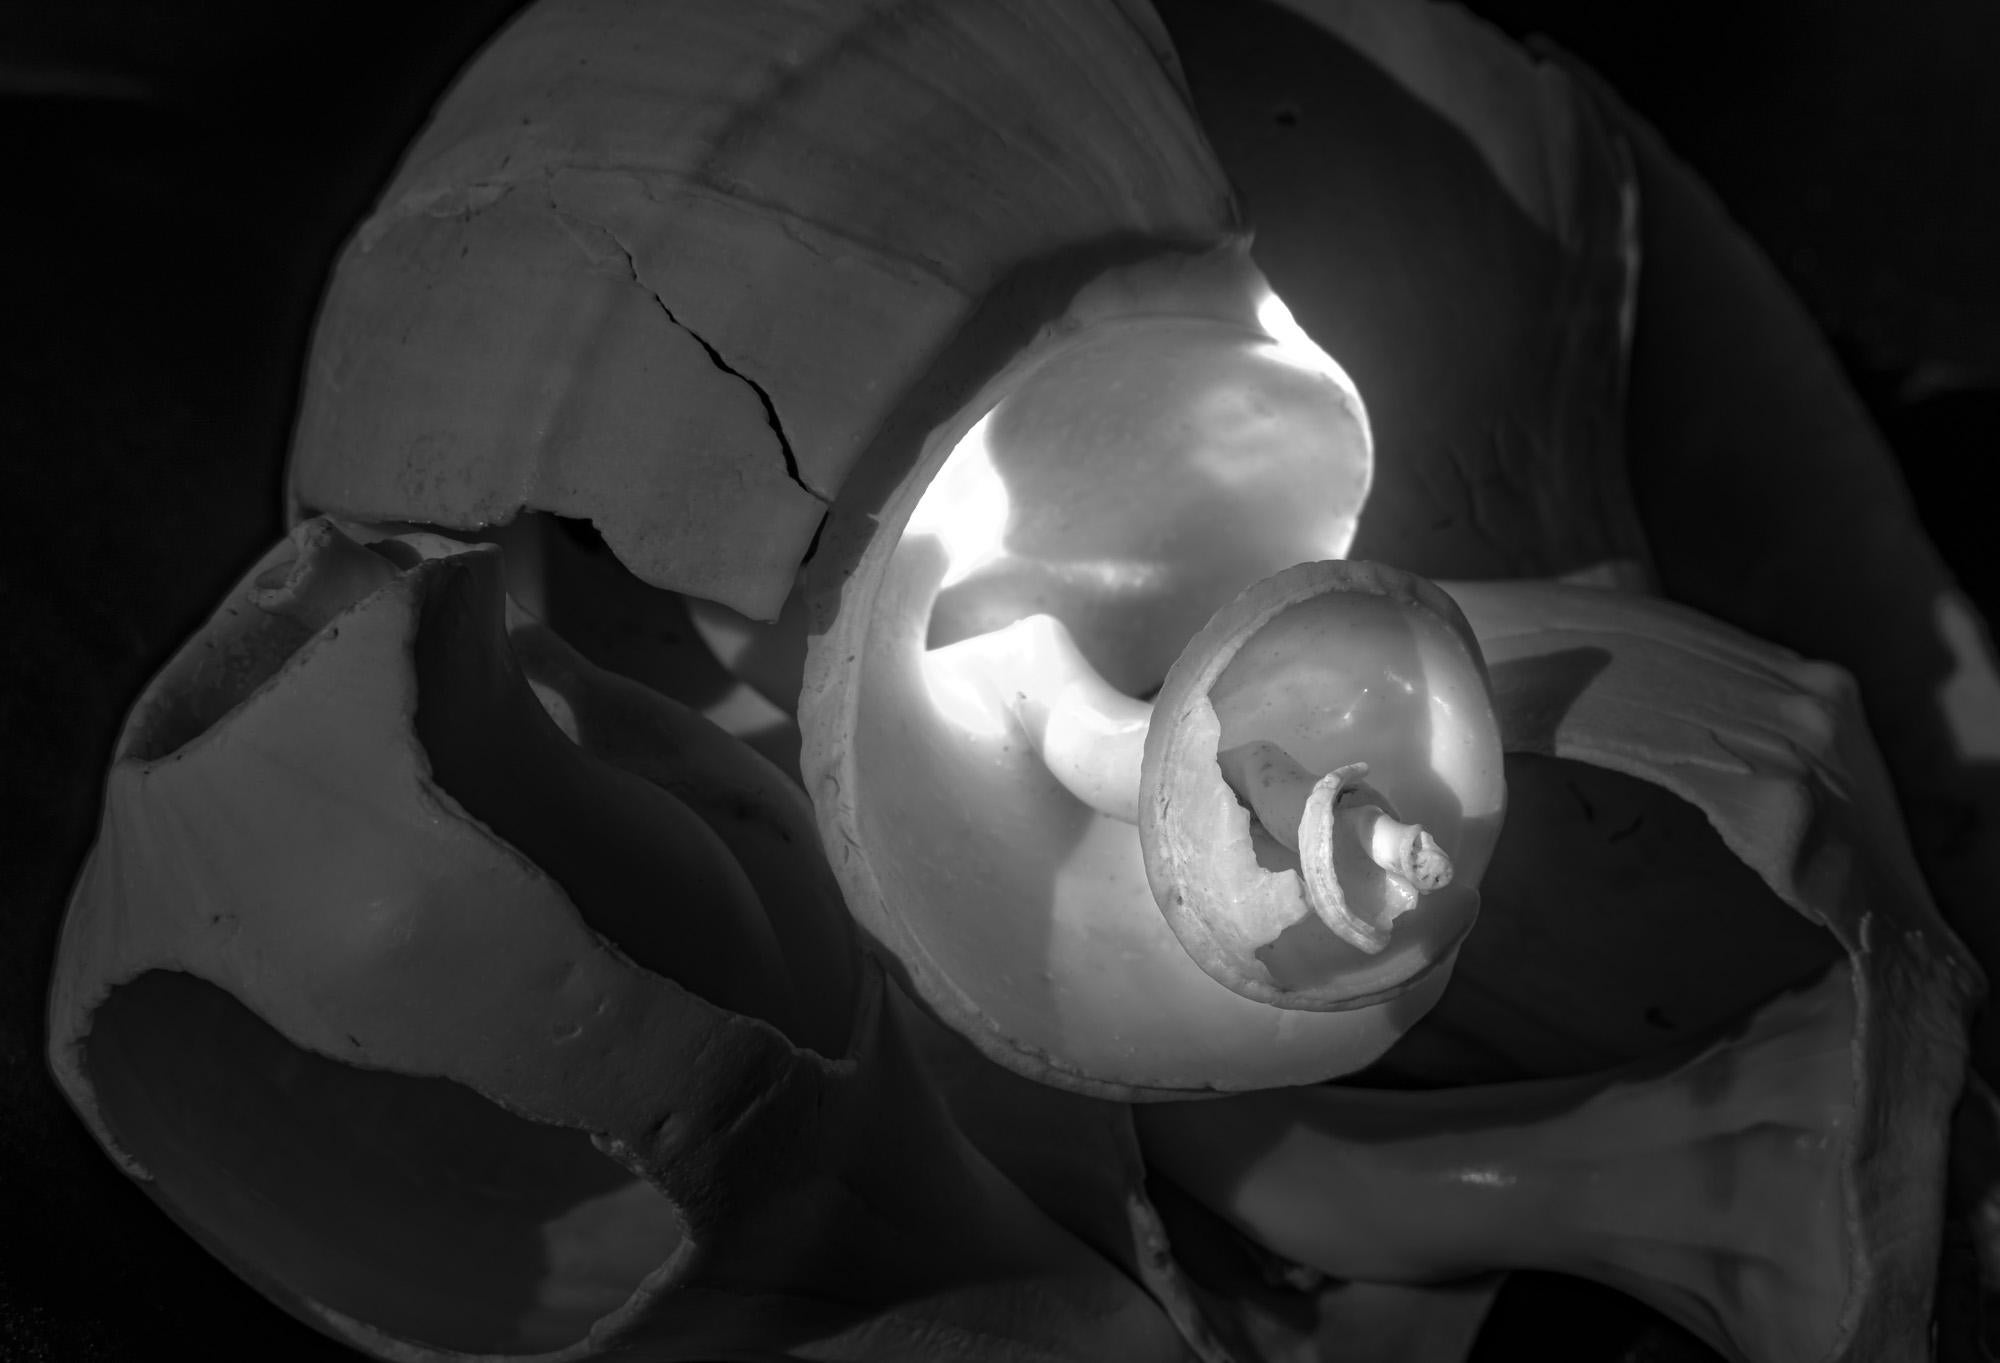 Howard Lewis Still-Life Photograph - Limited Edition Still Life Black and White Photograph Shell "Spiraling Out"